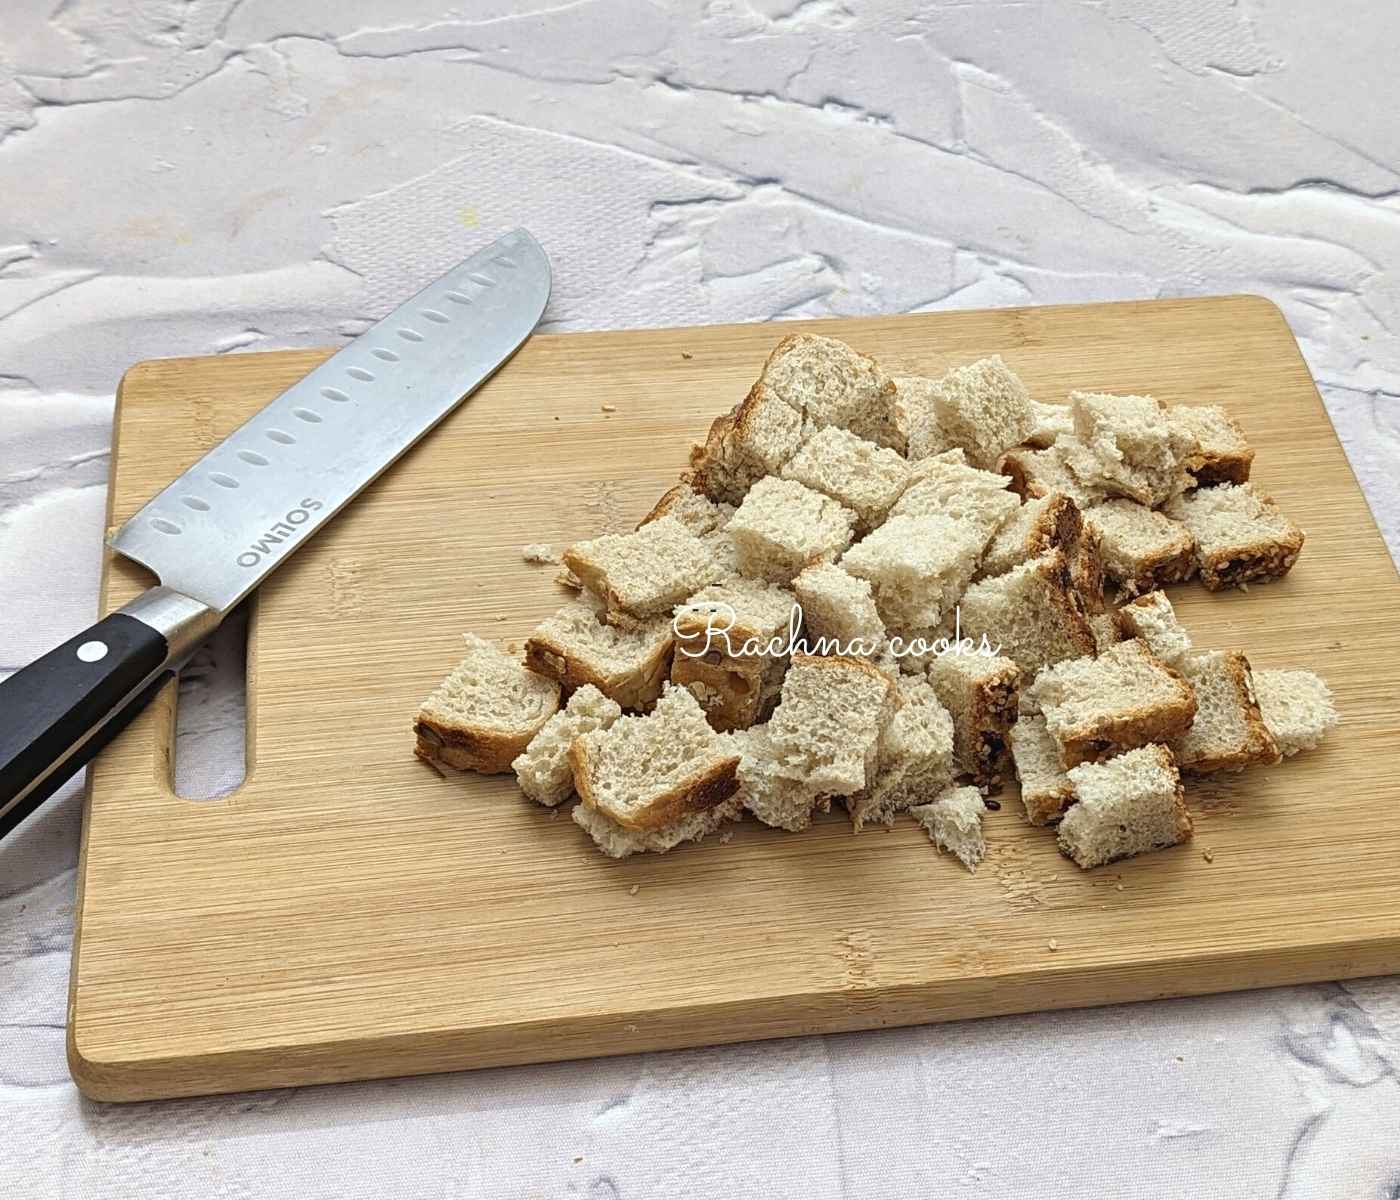 Bread slices cut into cubes